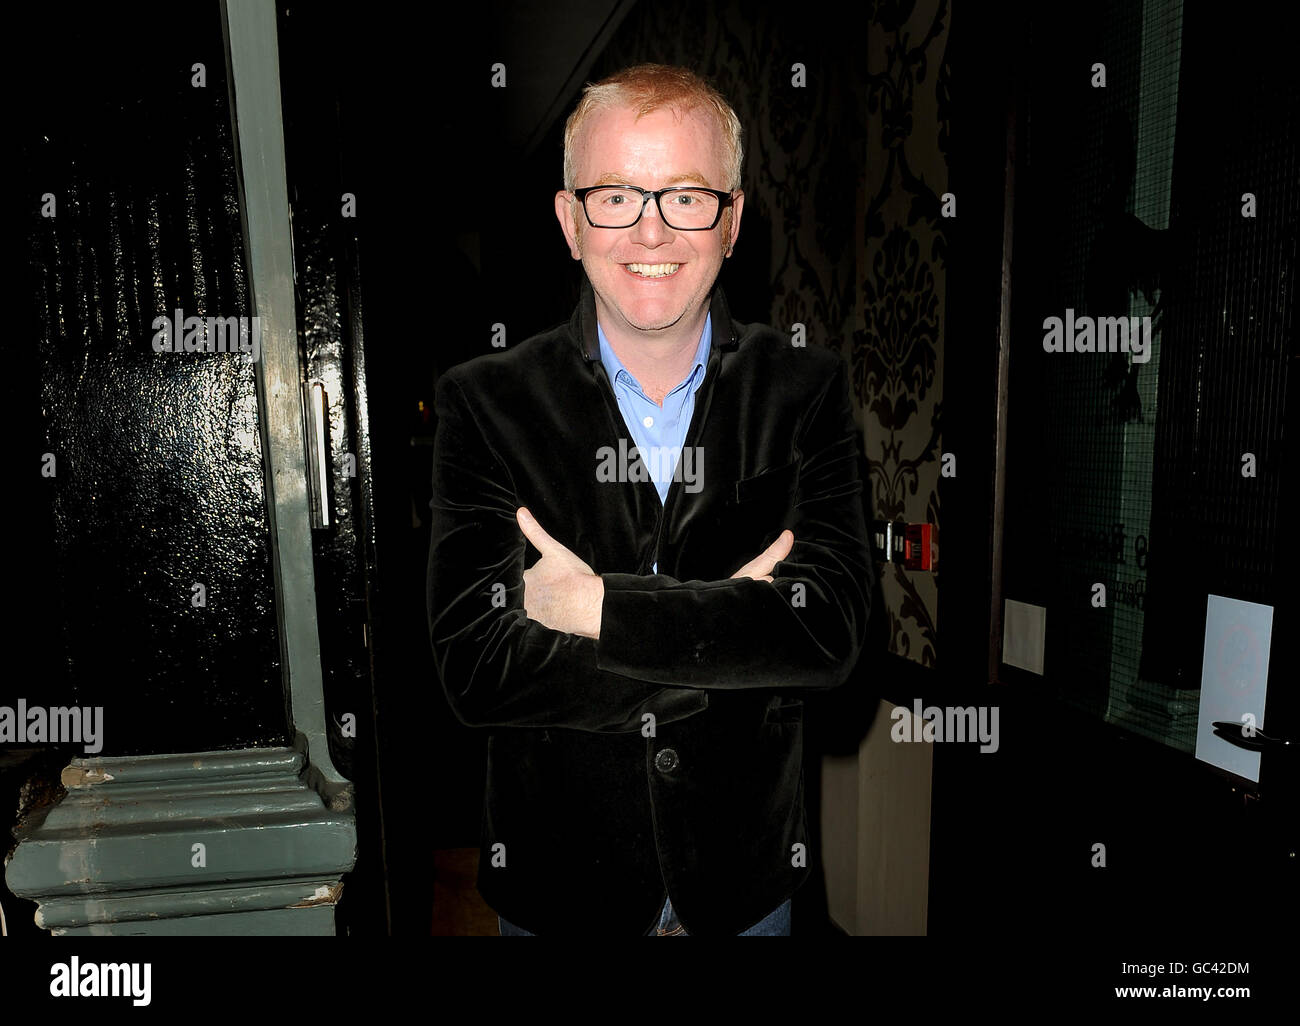 Chris Evans arrives at the Groucho Club in London for the launch party of his autobiography. PRESS ASSOCIATION Photo. Picture date: Thursday October 1 2009. Photo credit should read: Anthony Devlin/PA Wire Stock Photo